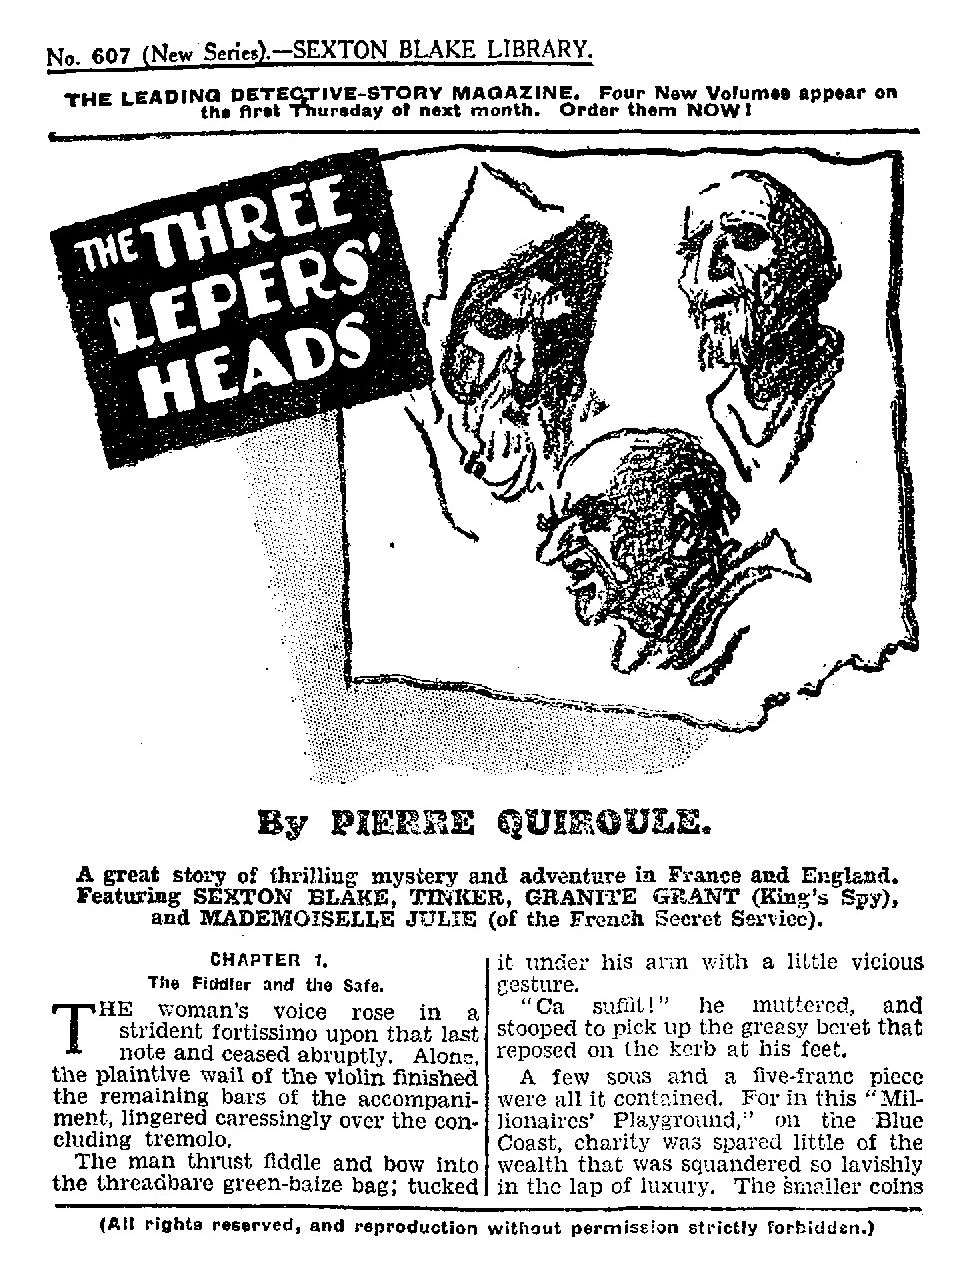 Comic Book Cover For Sexton Blake Library S2 607 - The Three Lepers' Heads